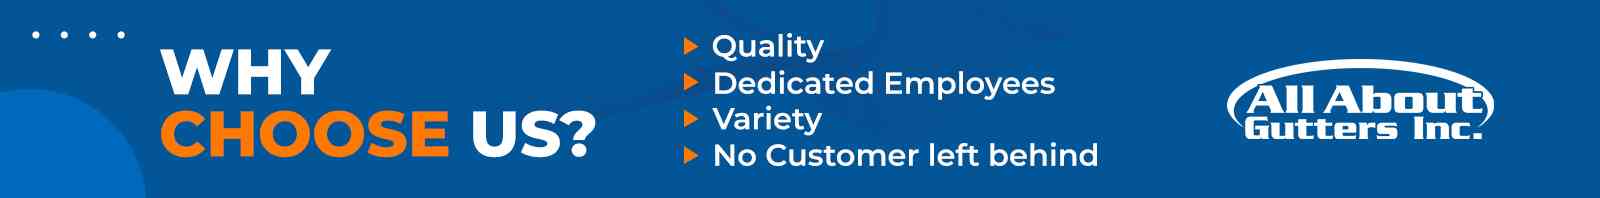 Why Choose Us? Why All About Gutters Over Others